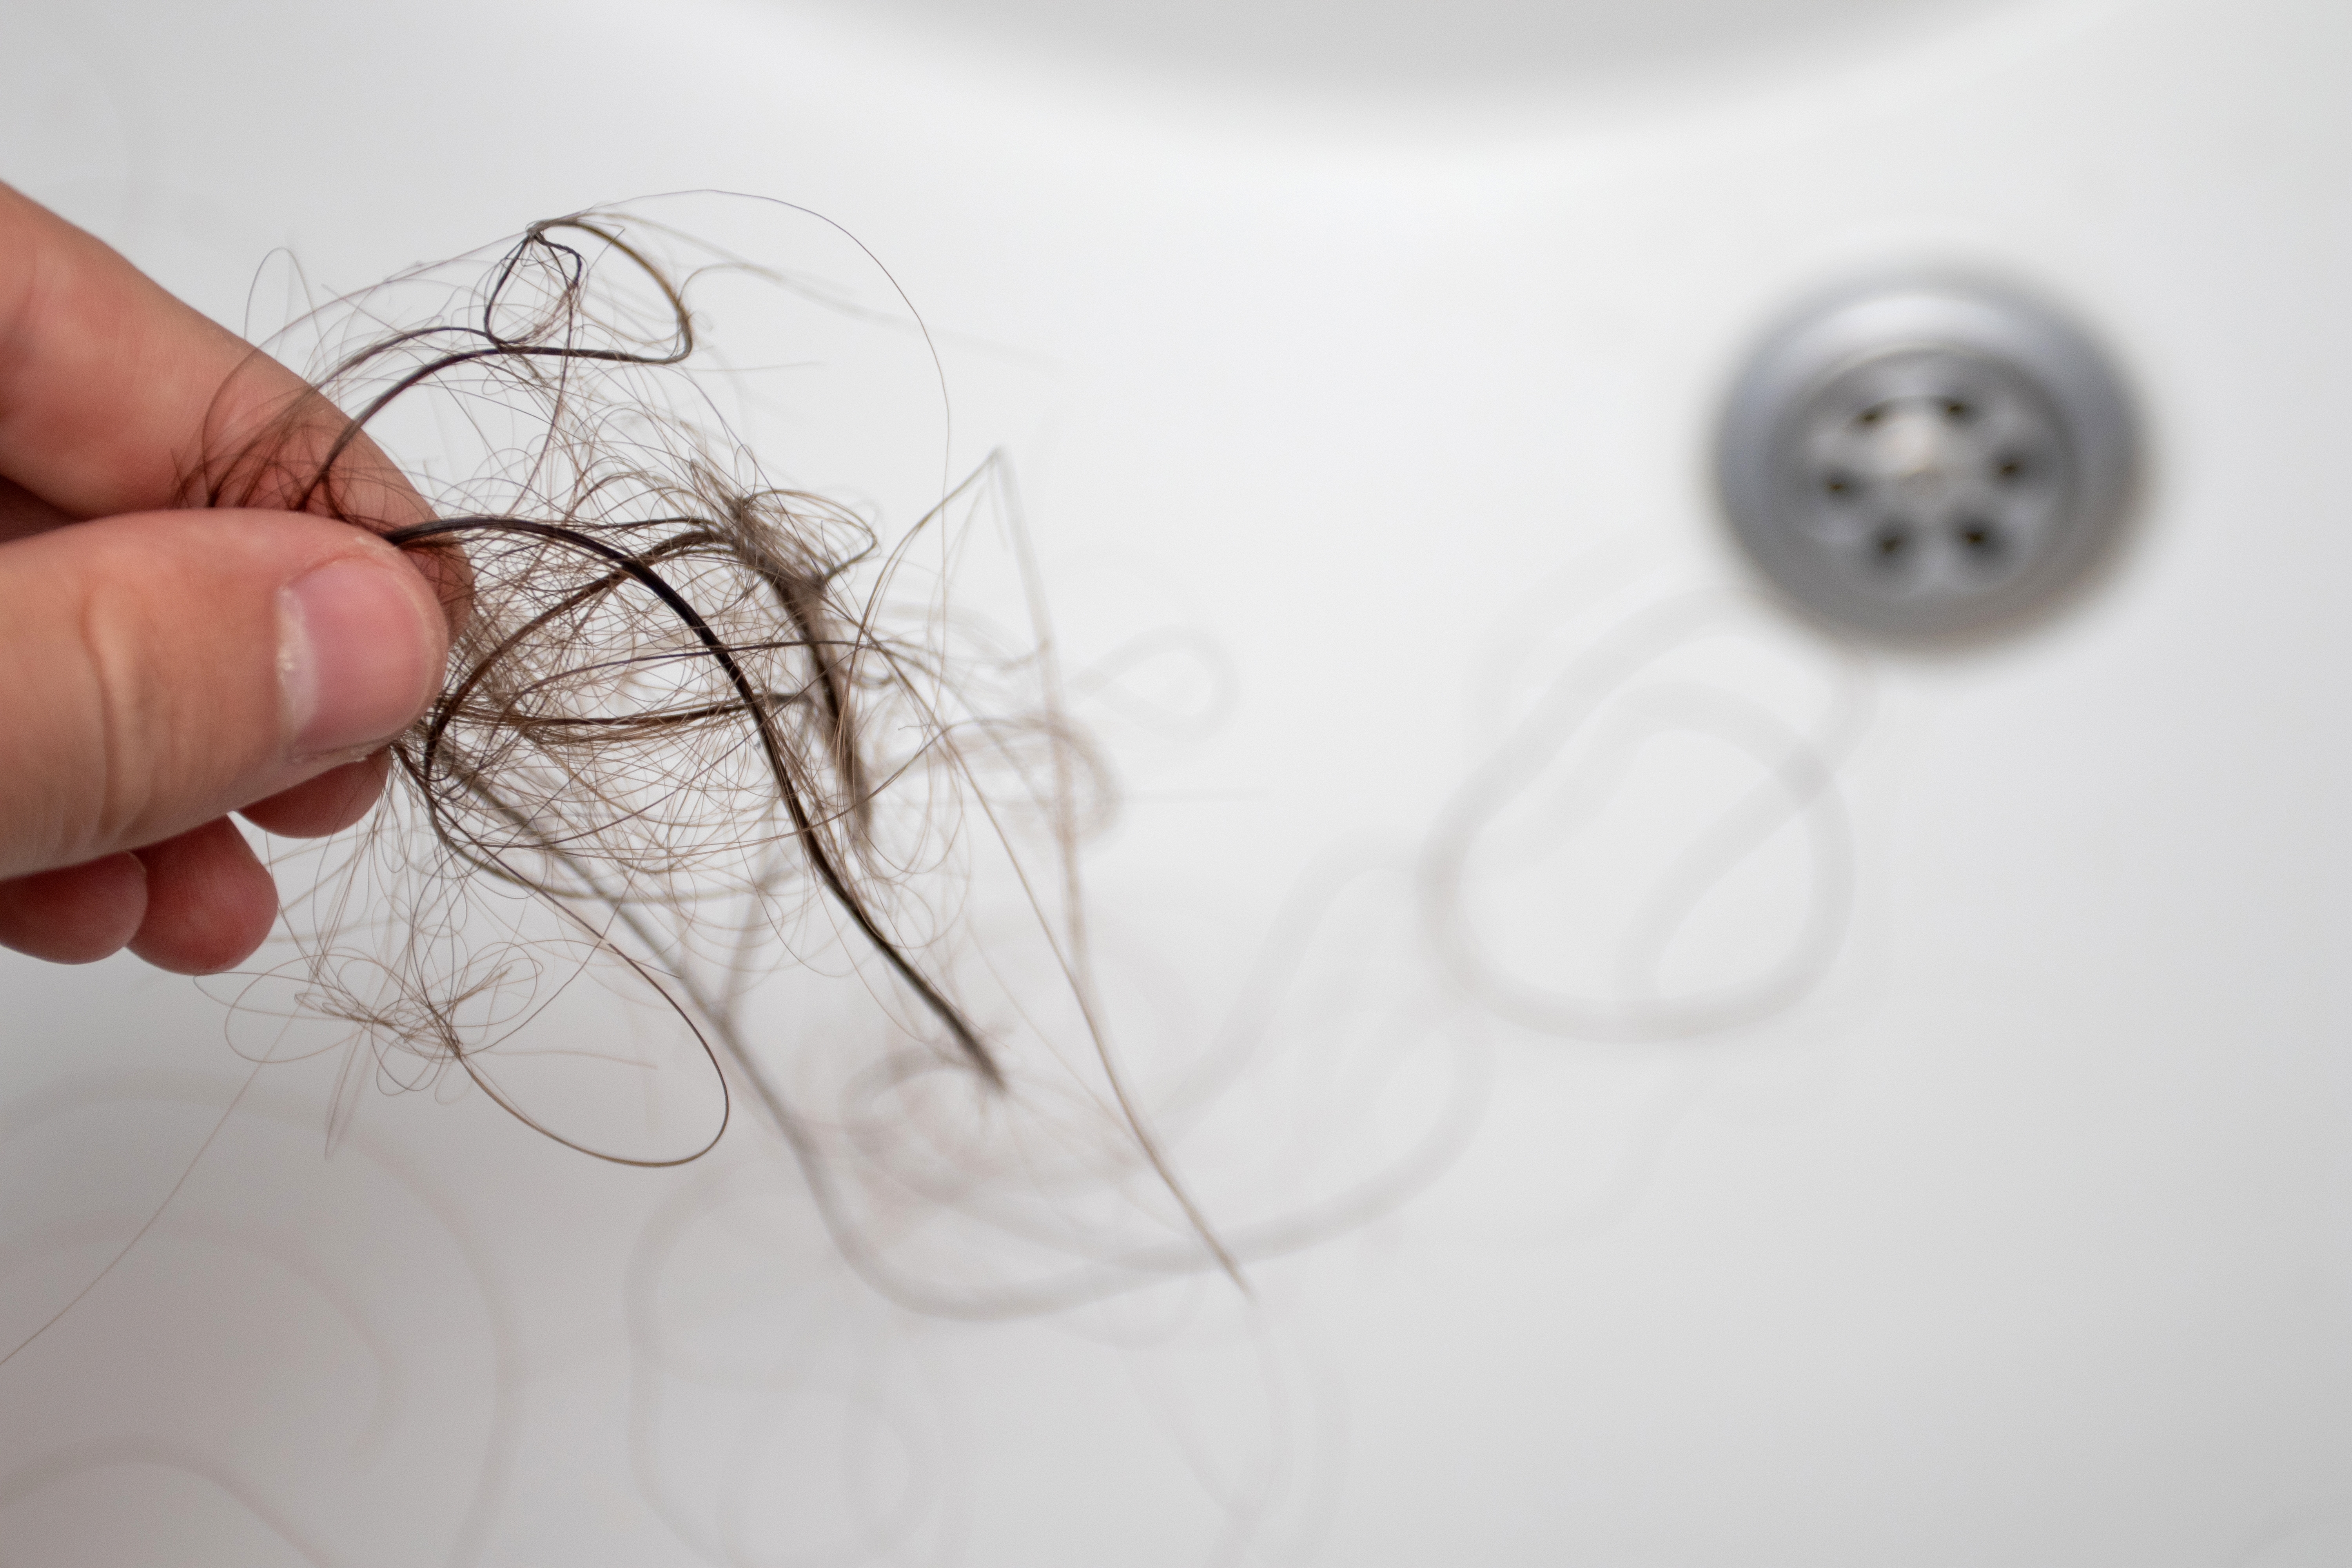 A person holding a bunch of hair strands above a sink | Source: Shutterstock